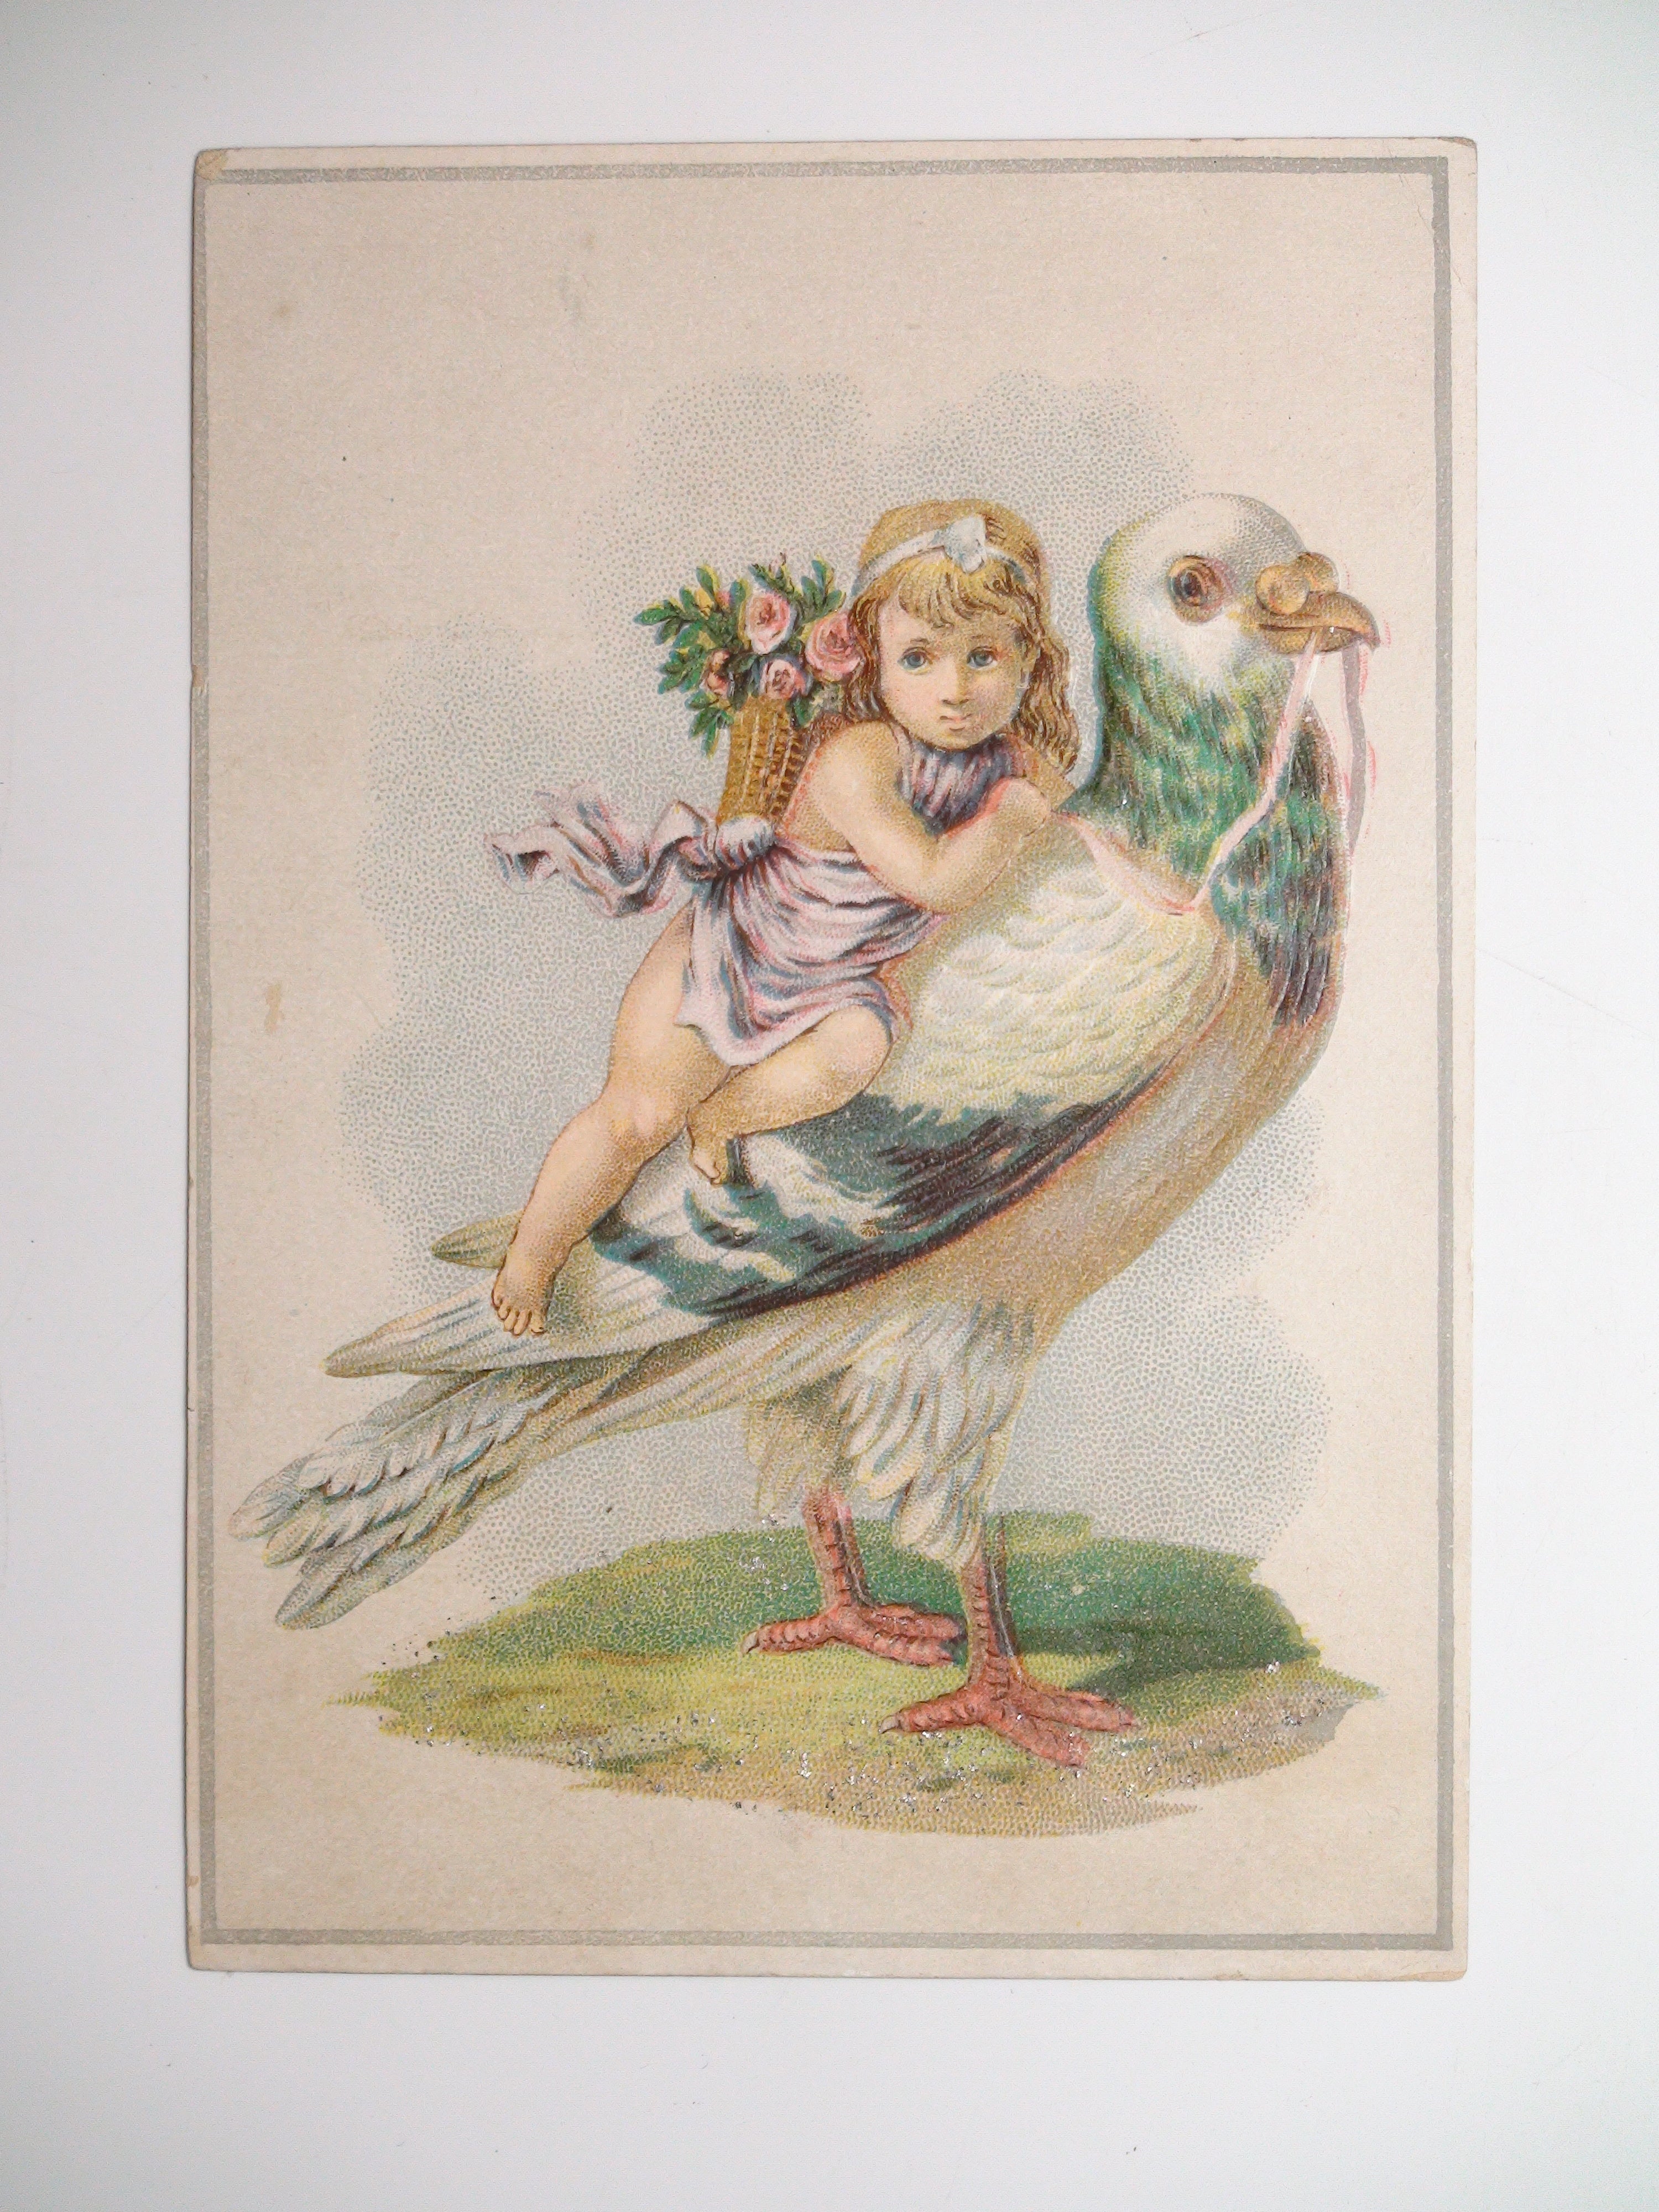 Pair of Original Embossed Victorian Glitter Postcards of Angels Riding Pigeons, in Excellent Condition 4.25in x 6in